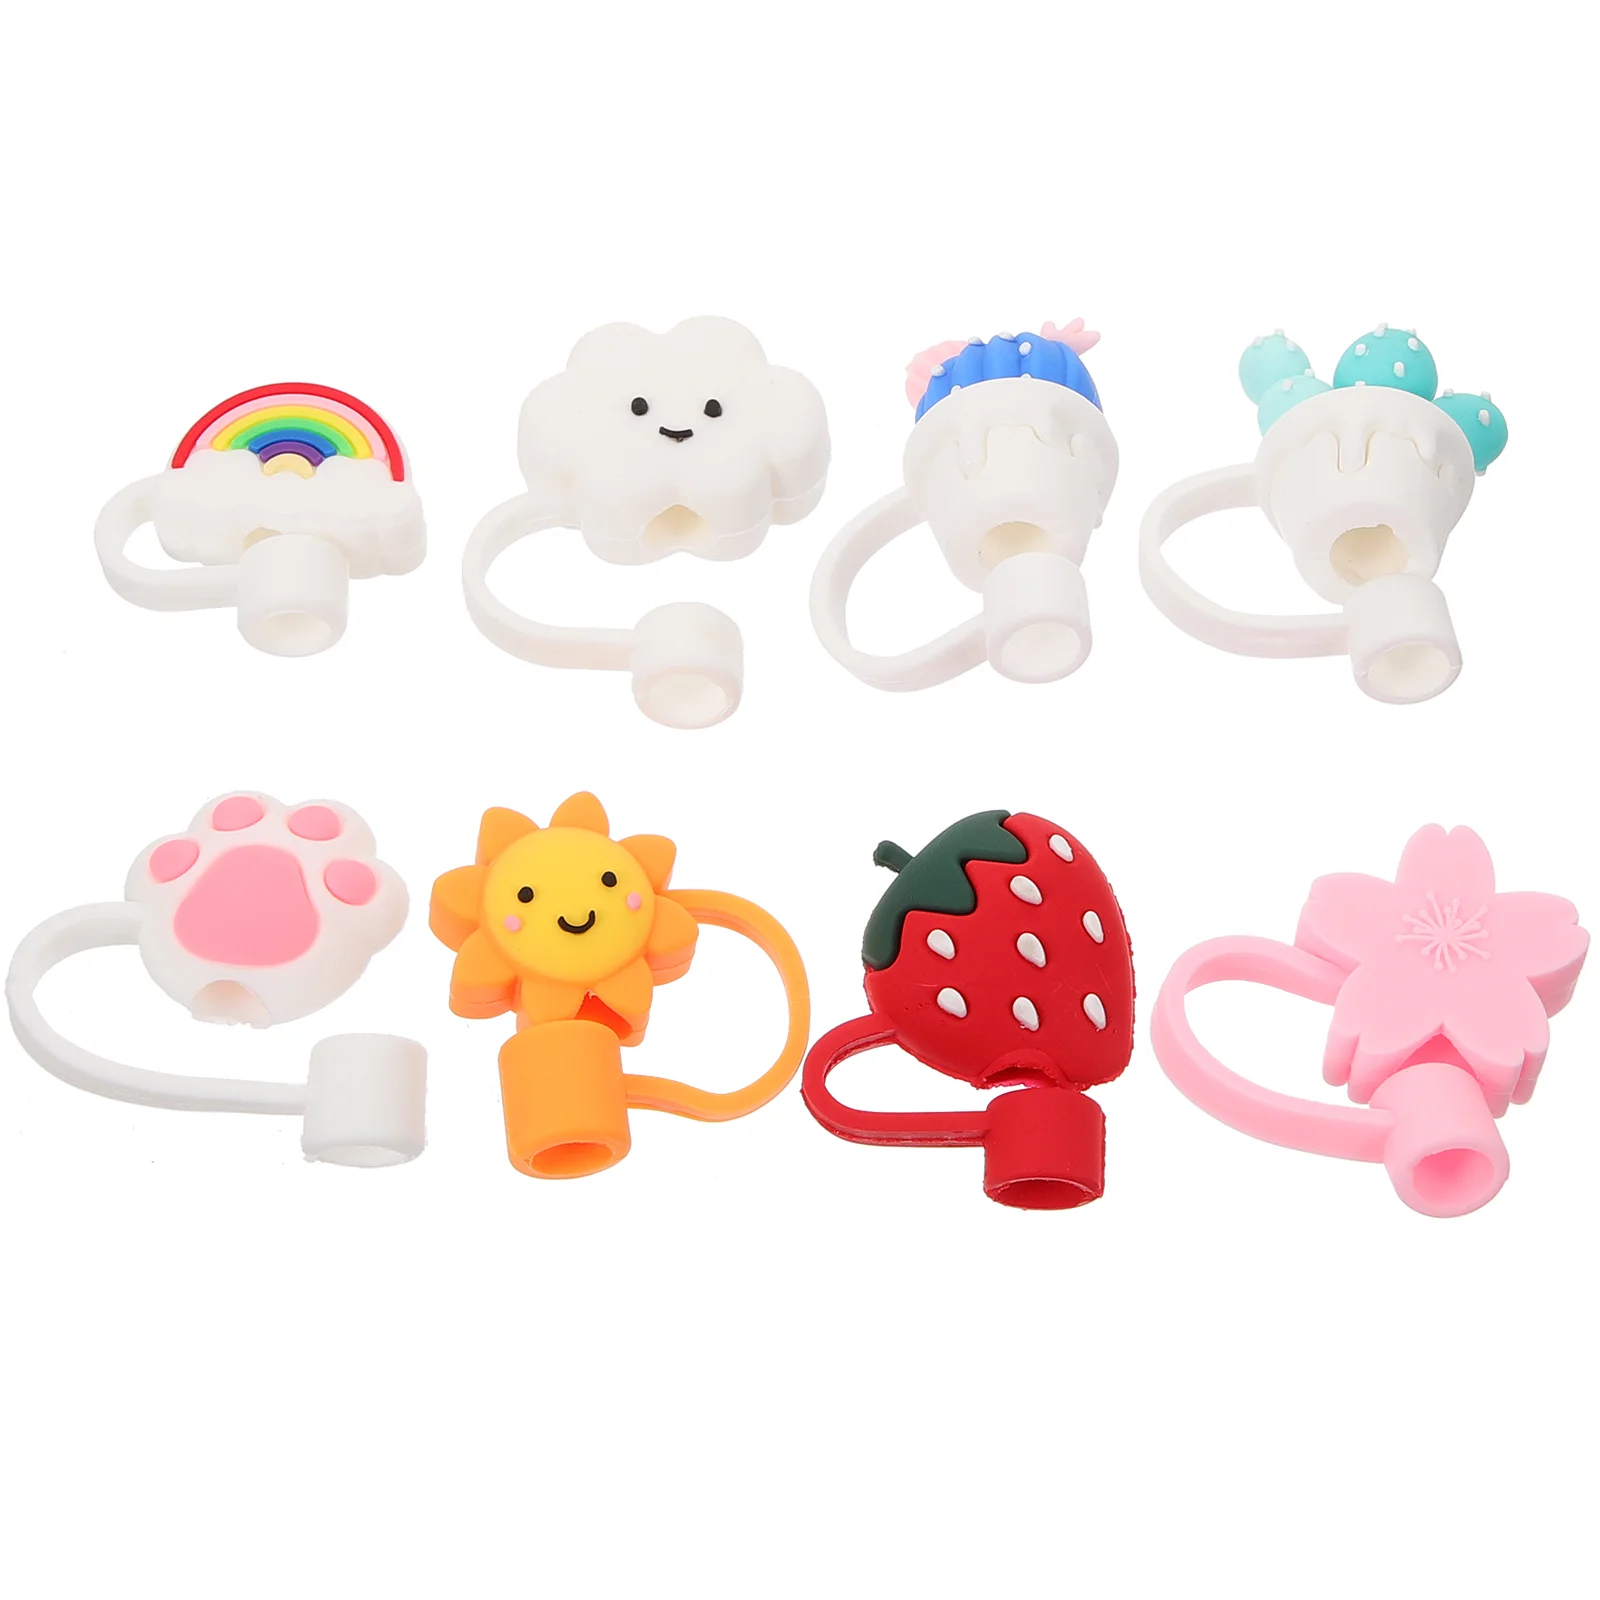 

8pcs Drinking Straw Plugs Decorative Straw Covers Cartoon Reusable Straw Lids Straw Toppers